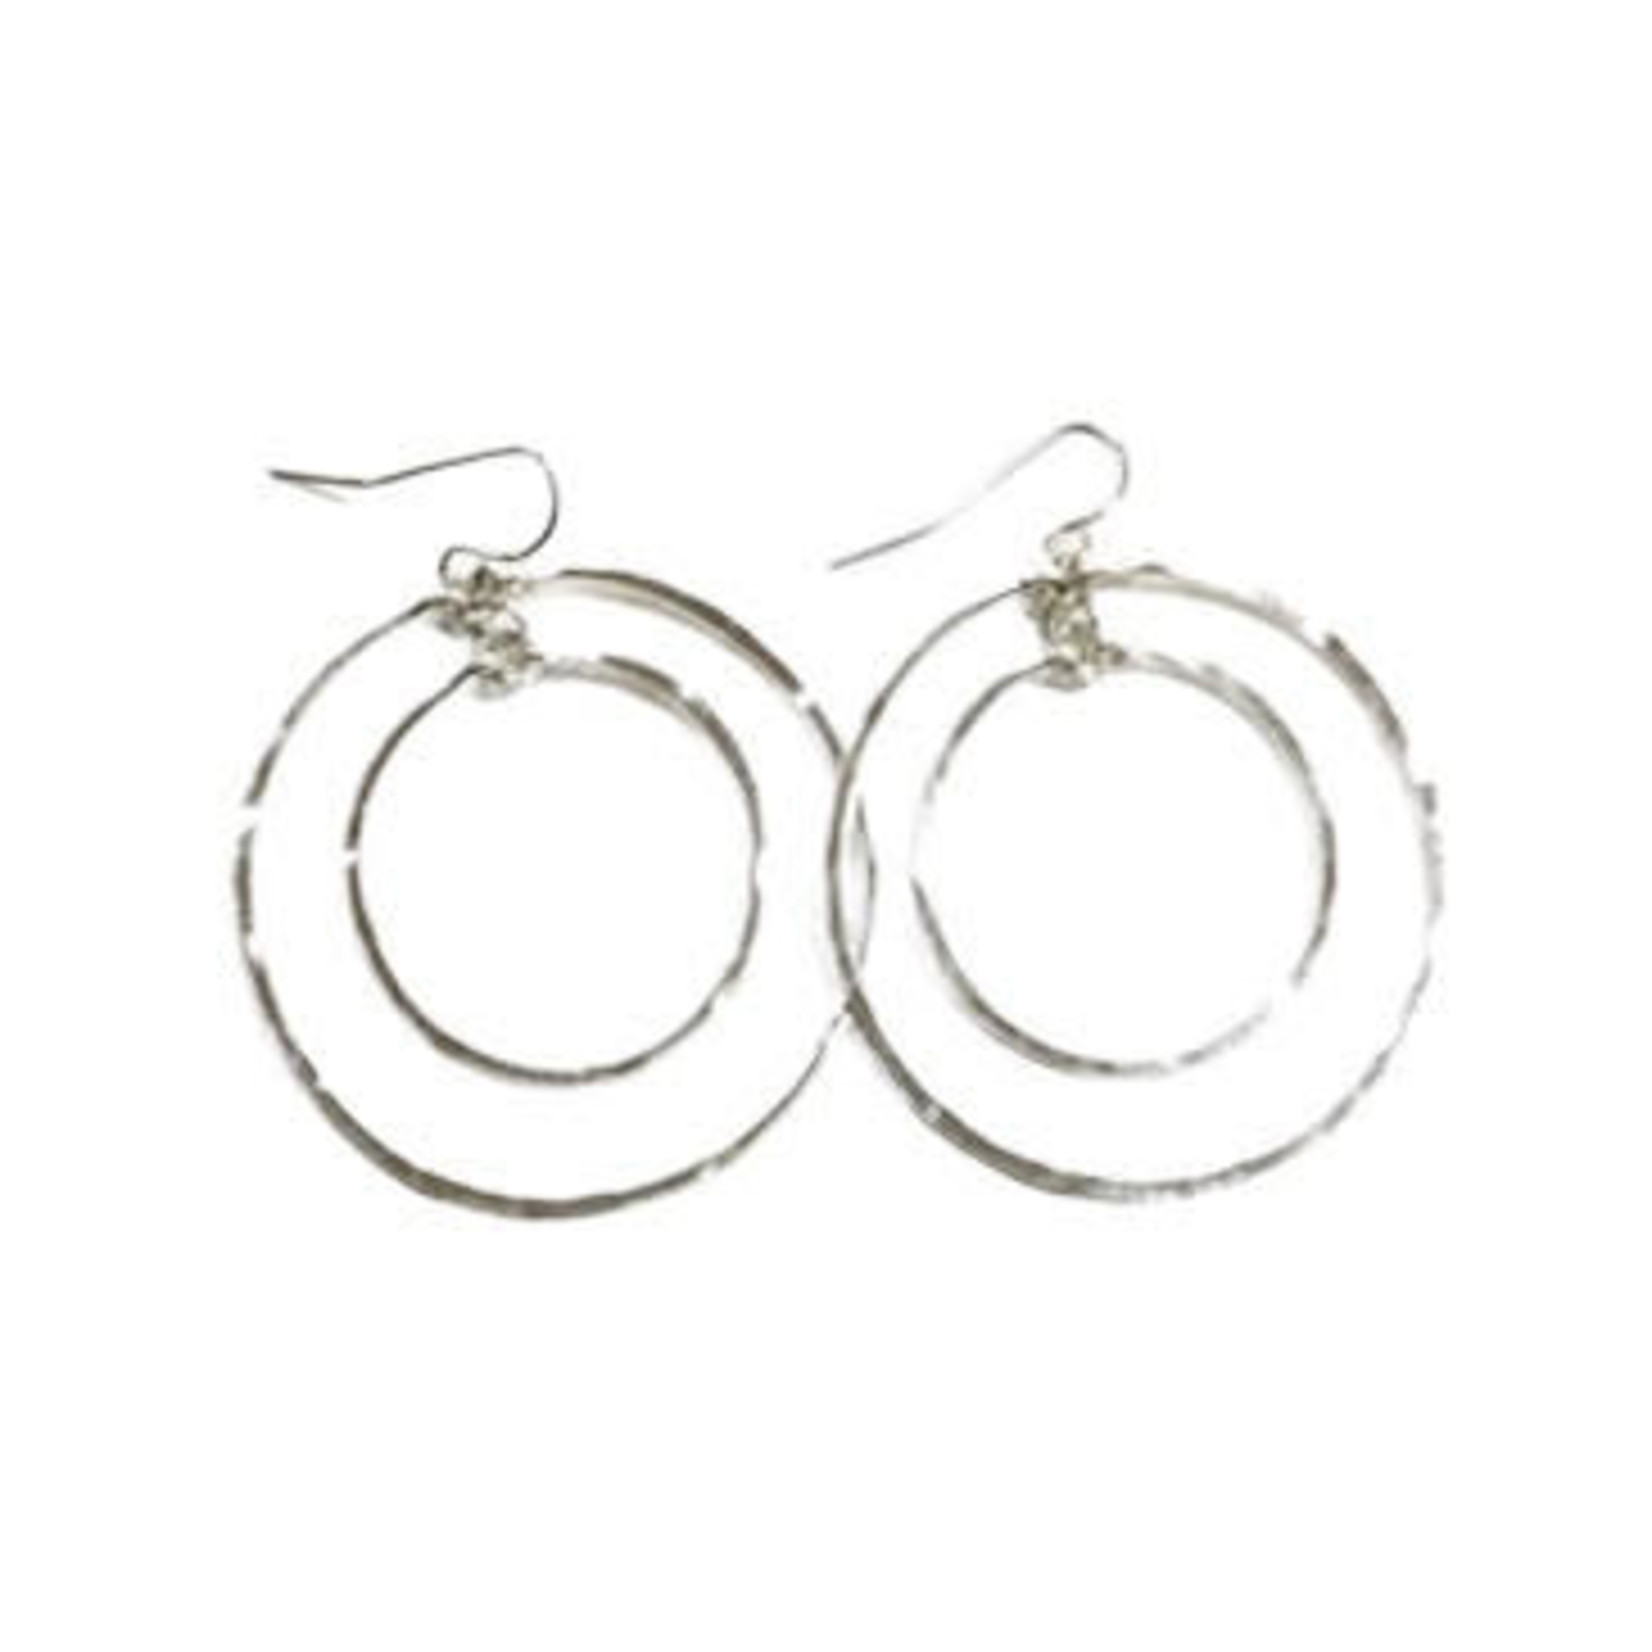 Lani Silver Plated Hammered Earrings Silver  Medium Dual Circles 12S